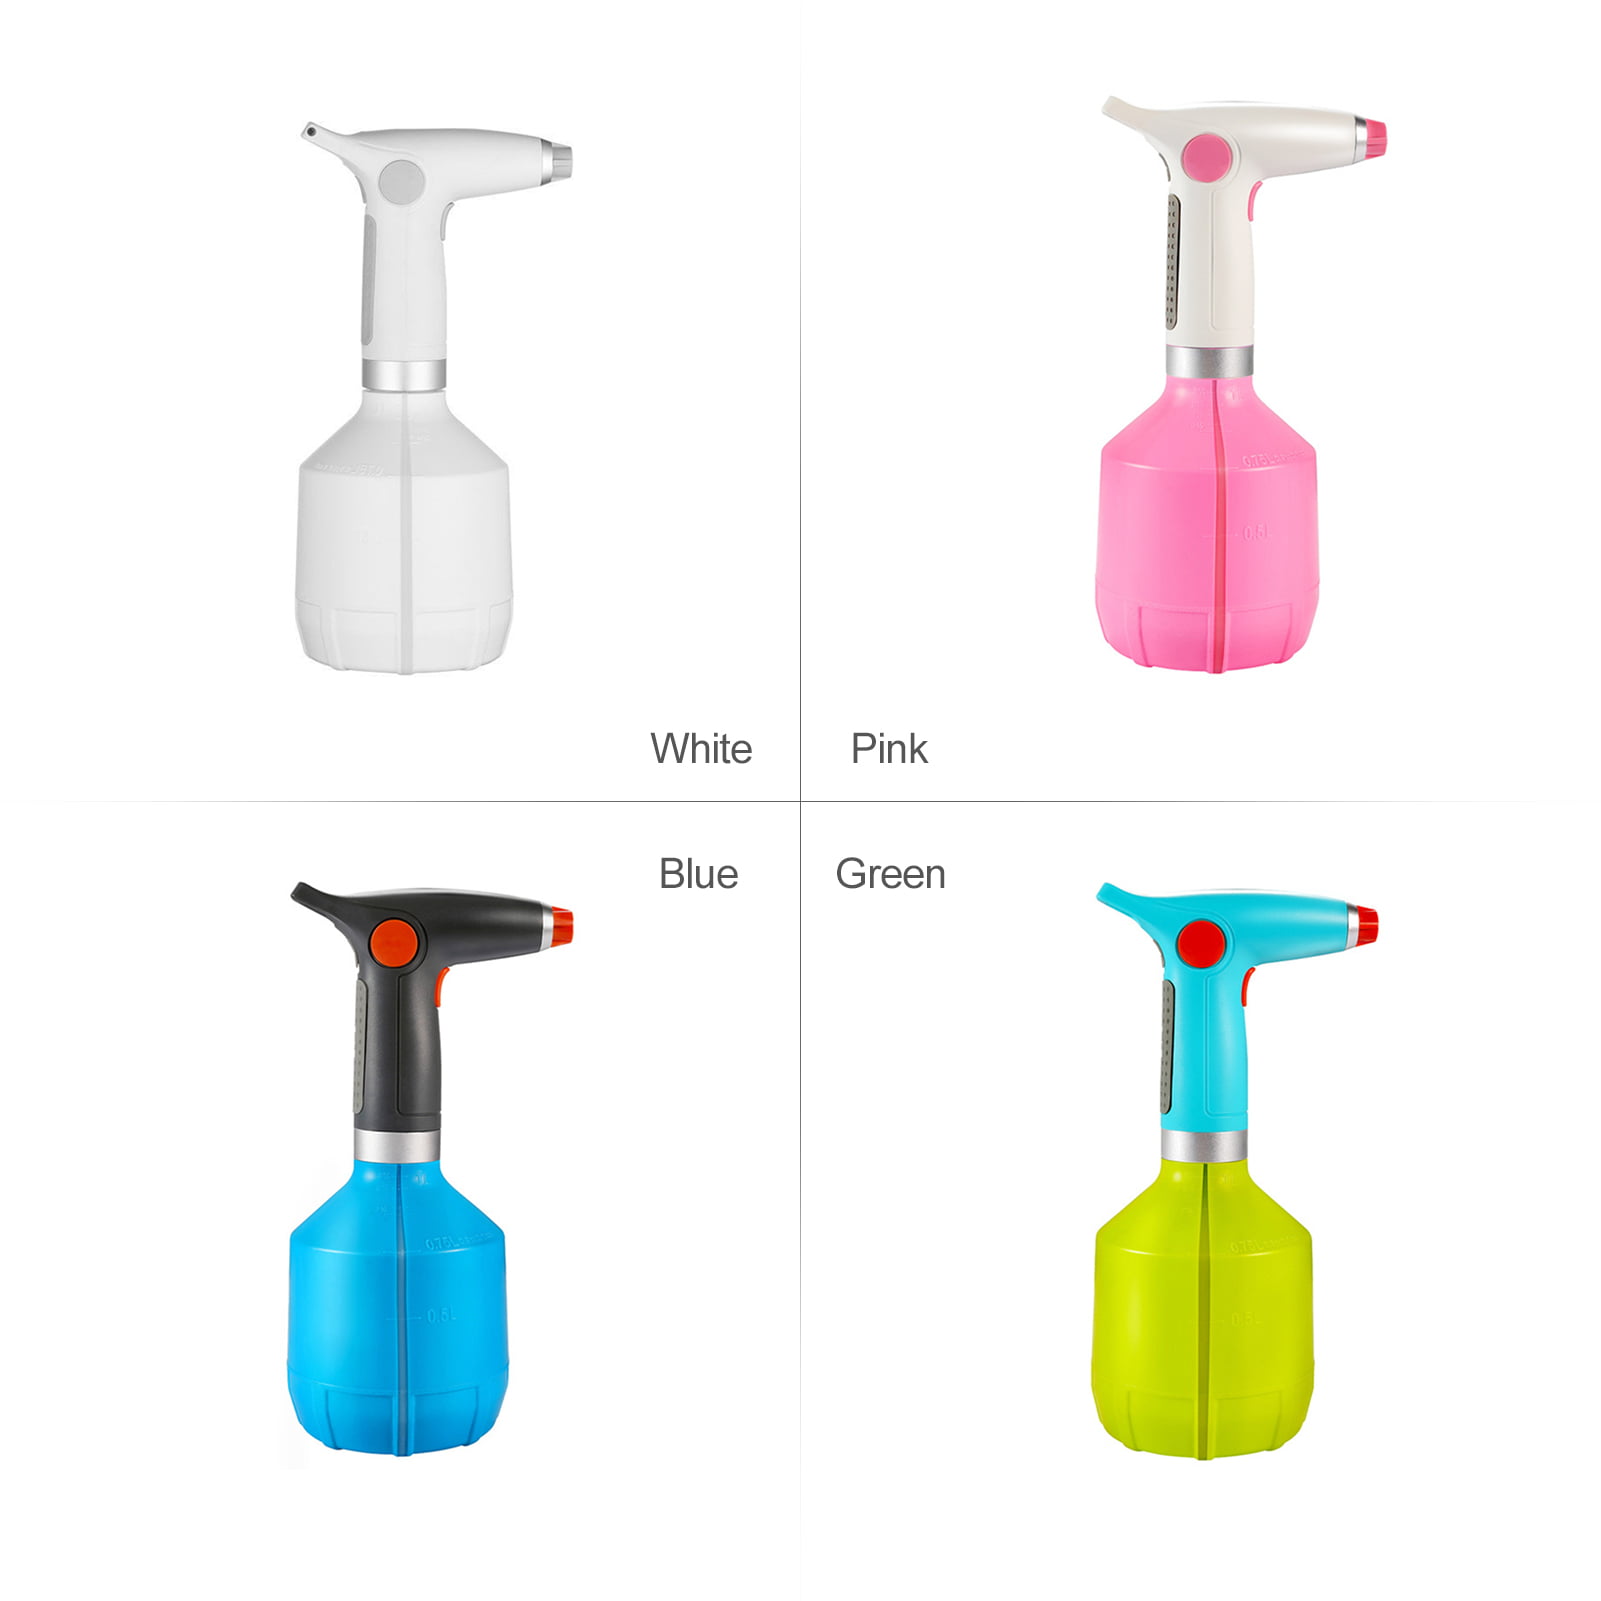 0.5 Gallon Electric Spray Bottle Watering Can for Indoor Outdoor Cleaning Gardening Handheld Plant Atomizer with Adjustable Spout Automatic Stop 2200mAh Rechargeable Plant Mister Sprayer Spritzer 